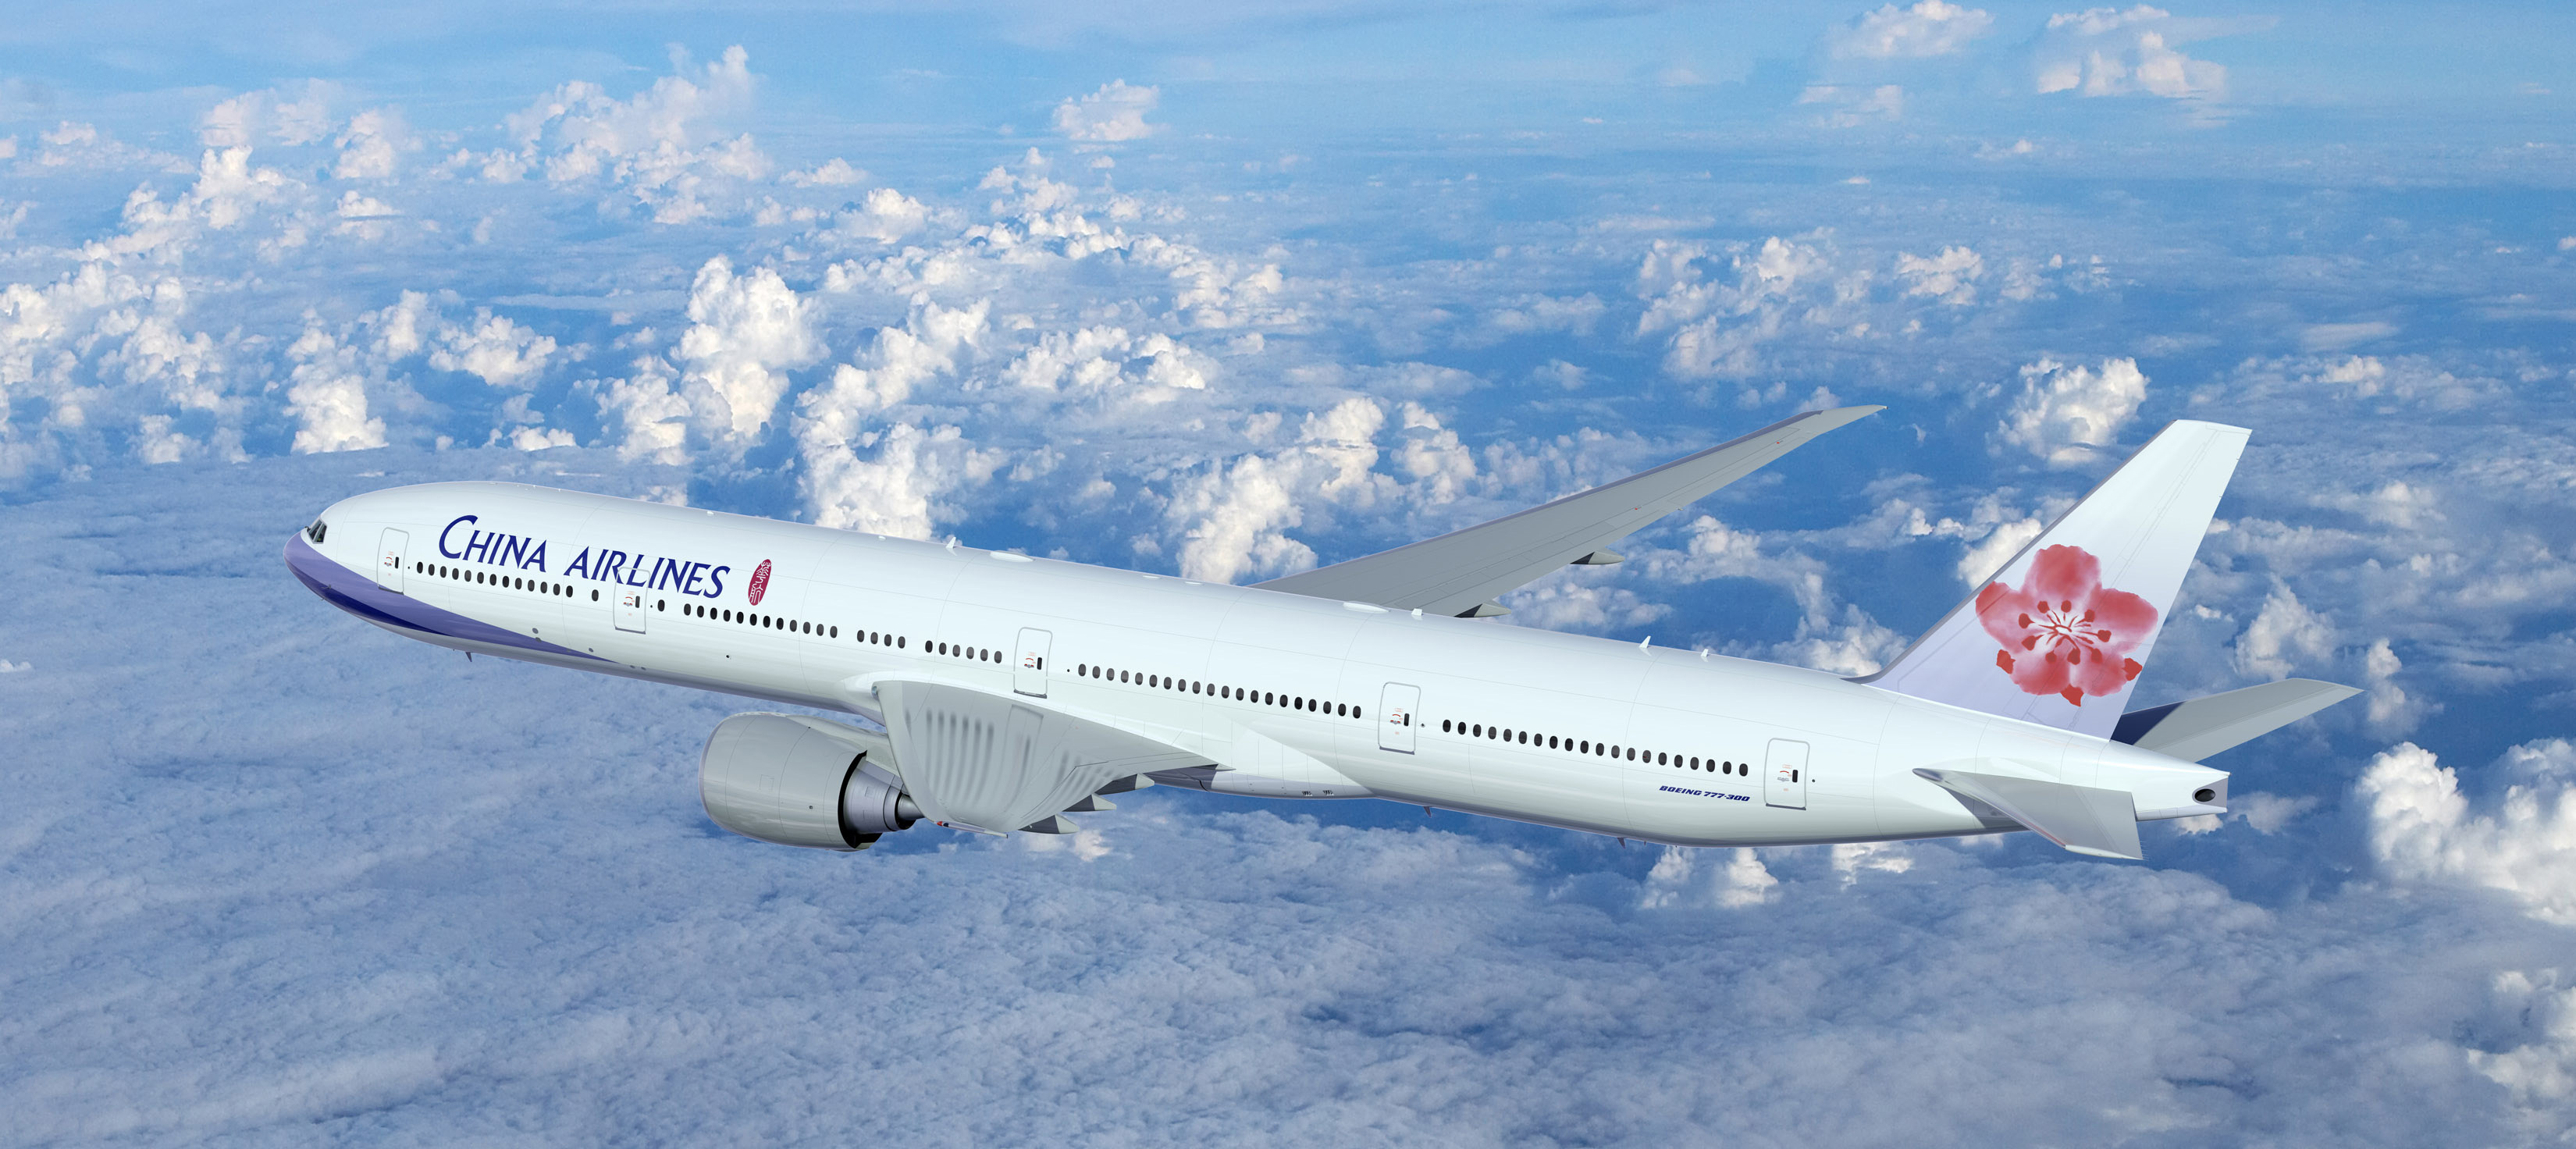 China Airlines, Boeing 777, Airliner aircraft, Jet wallpaper, 3300x1480 Dual Screen Desktop